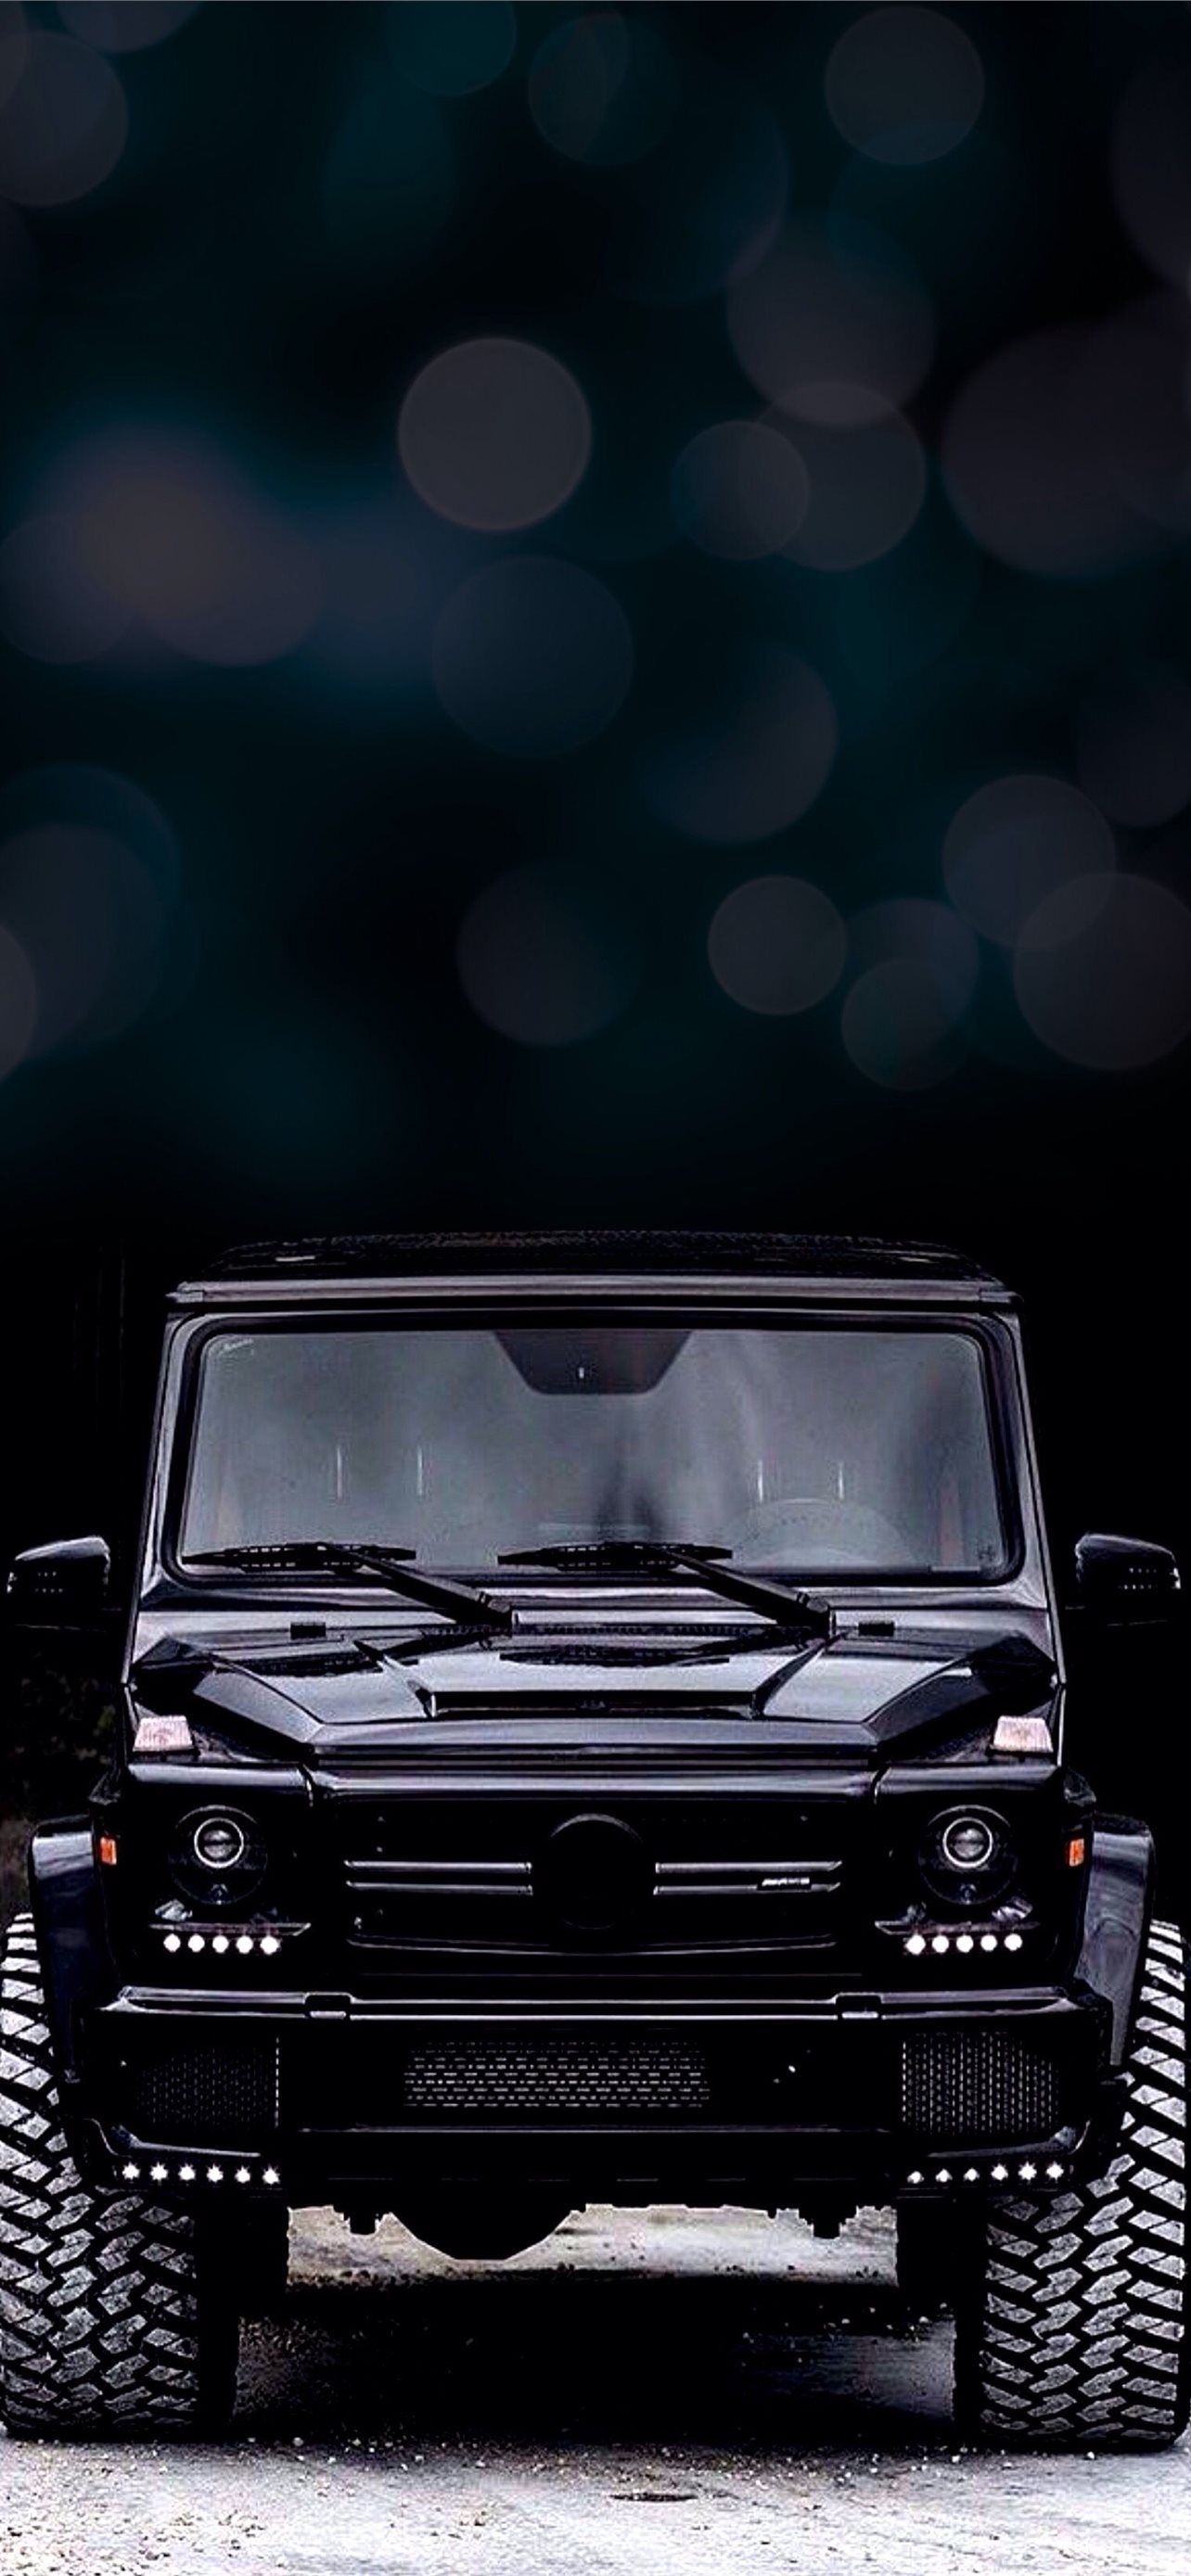 Mercedes-Benz G-Class, iPhone wallpapers, Classic sophistication, Free to download, 1290x2780 HD Phone